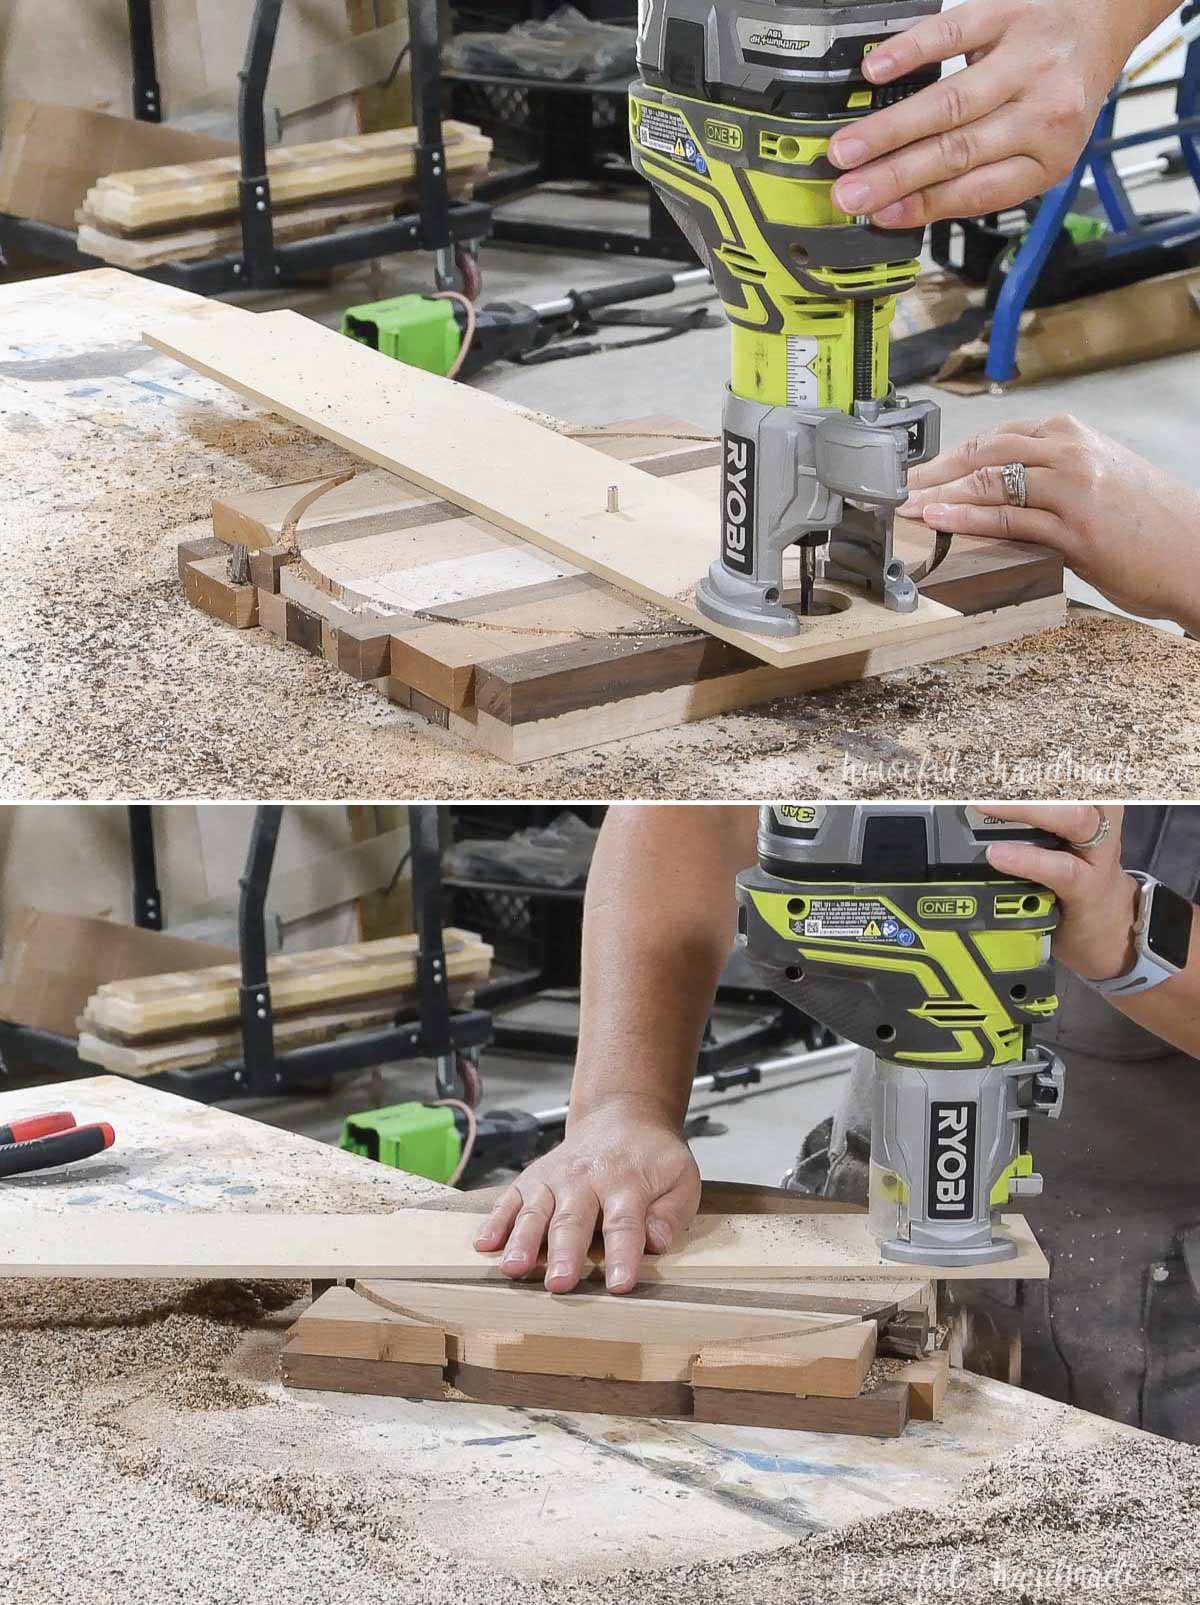 Cutting out the circle with a DIY router jig.